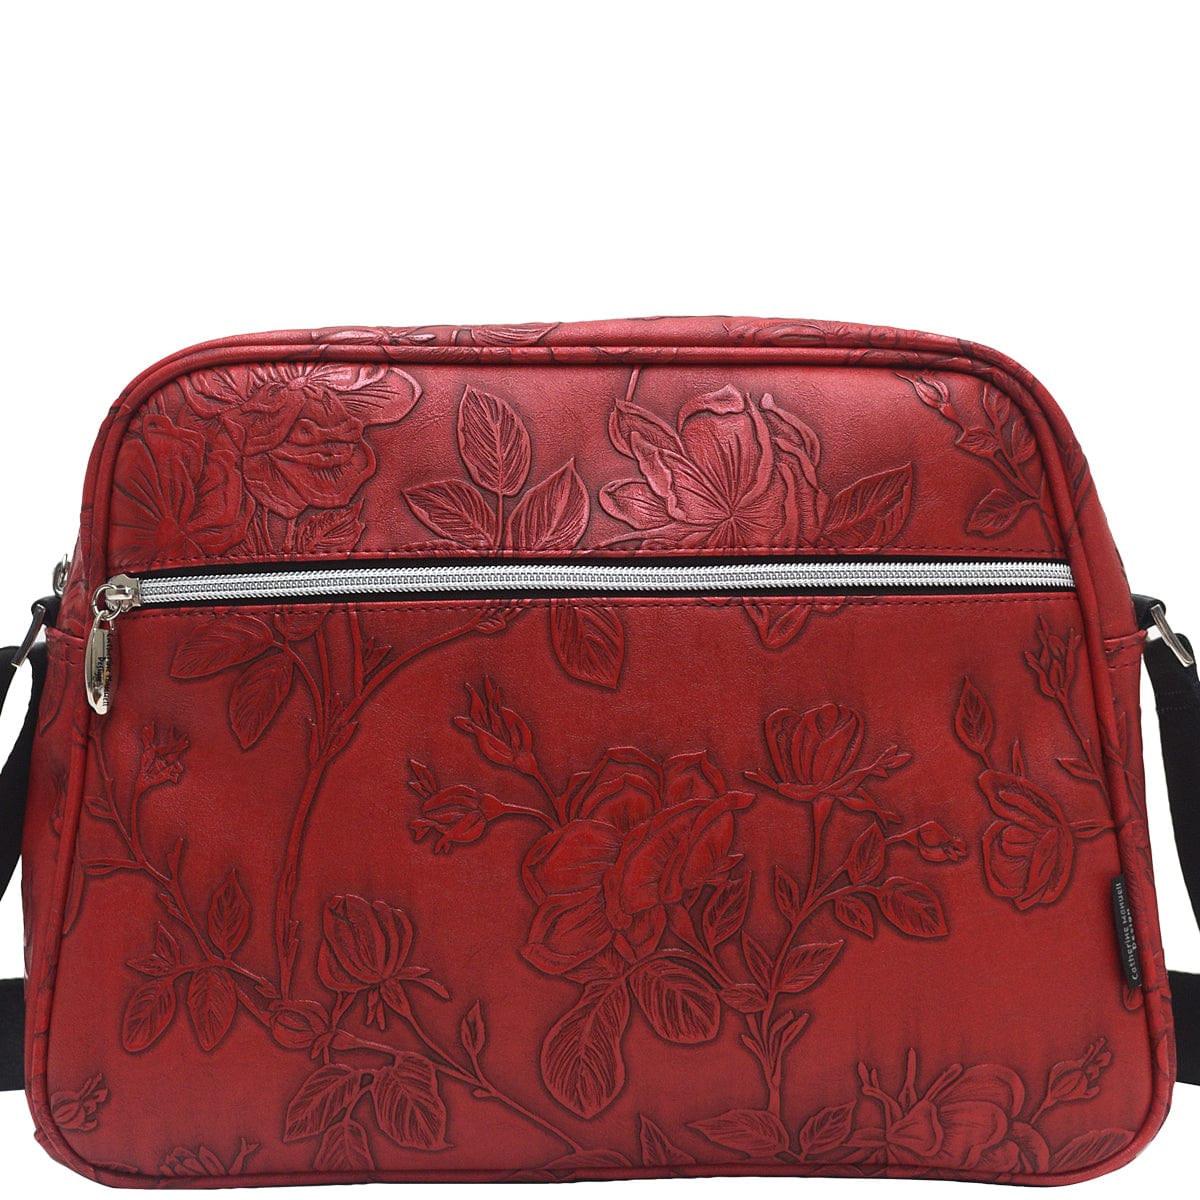 A-Line Bowler - Red Emboss Rose